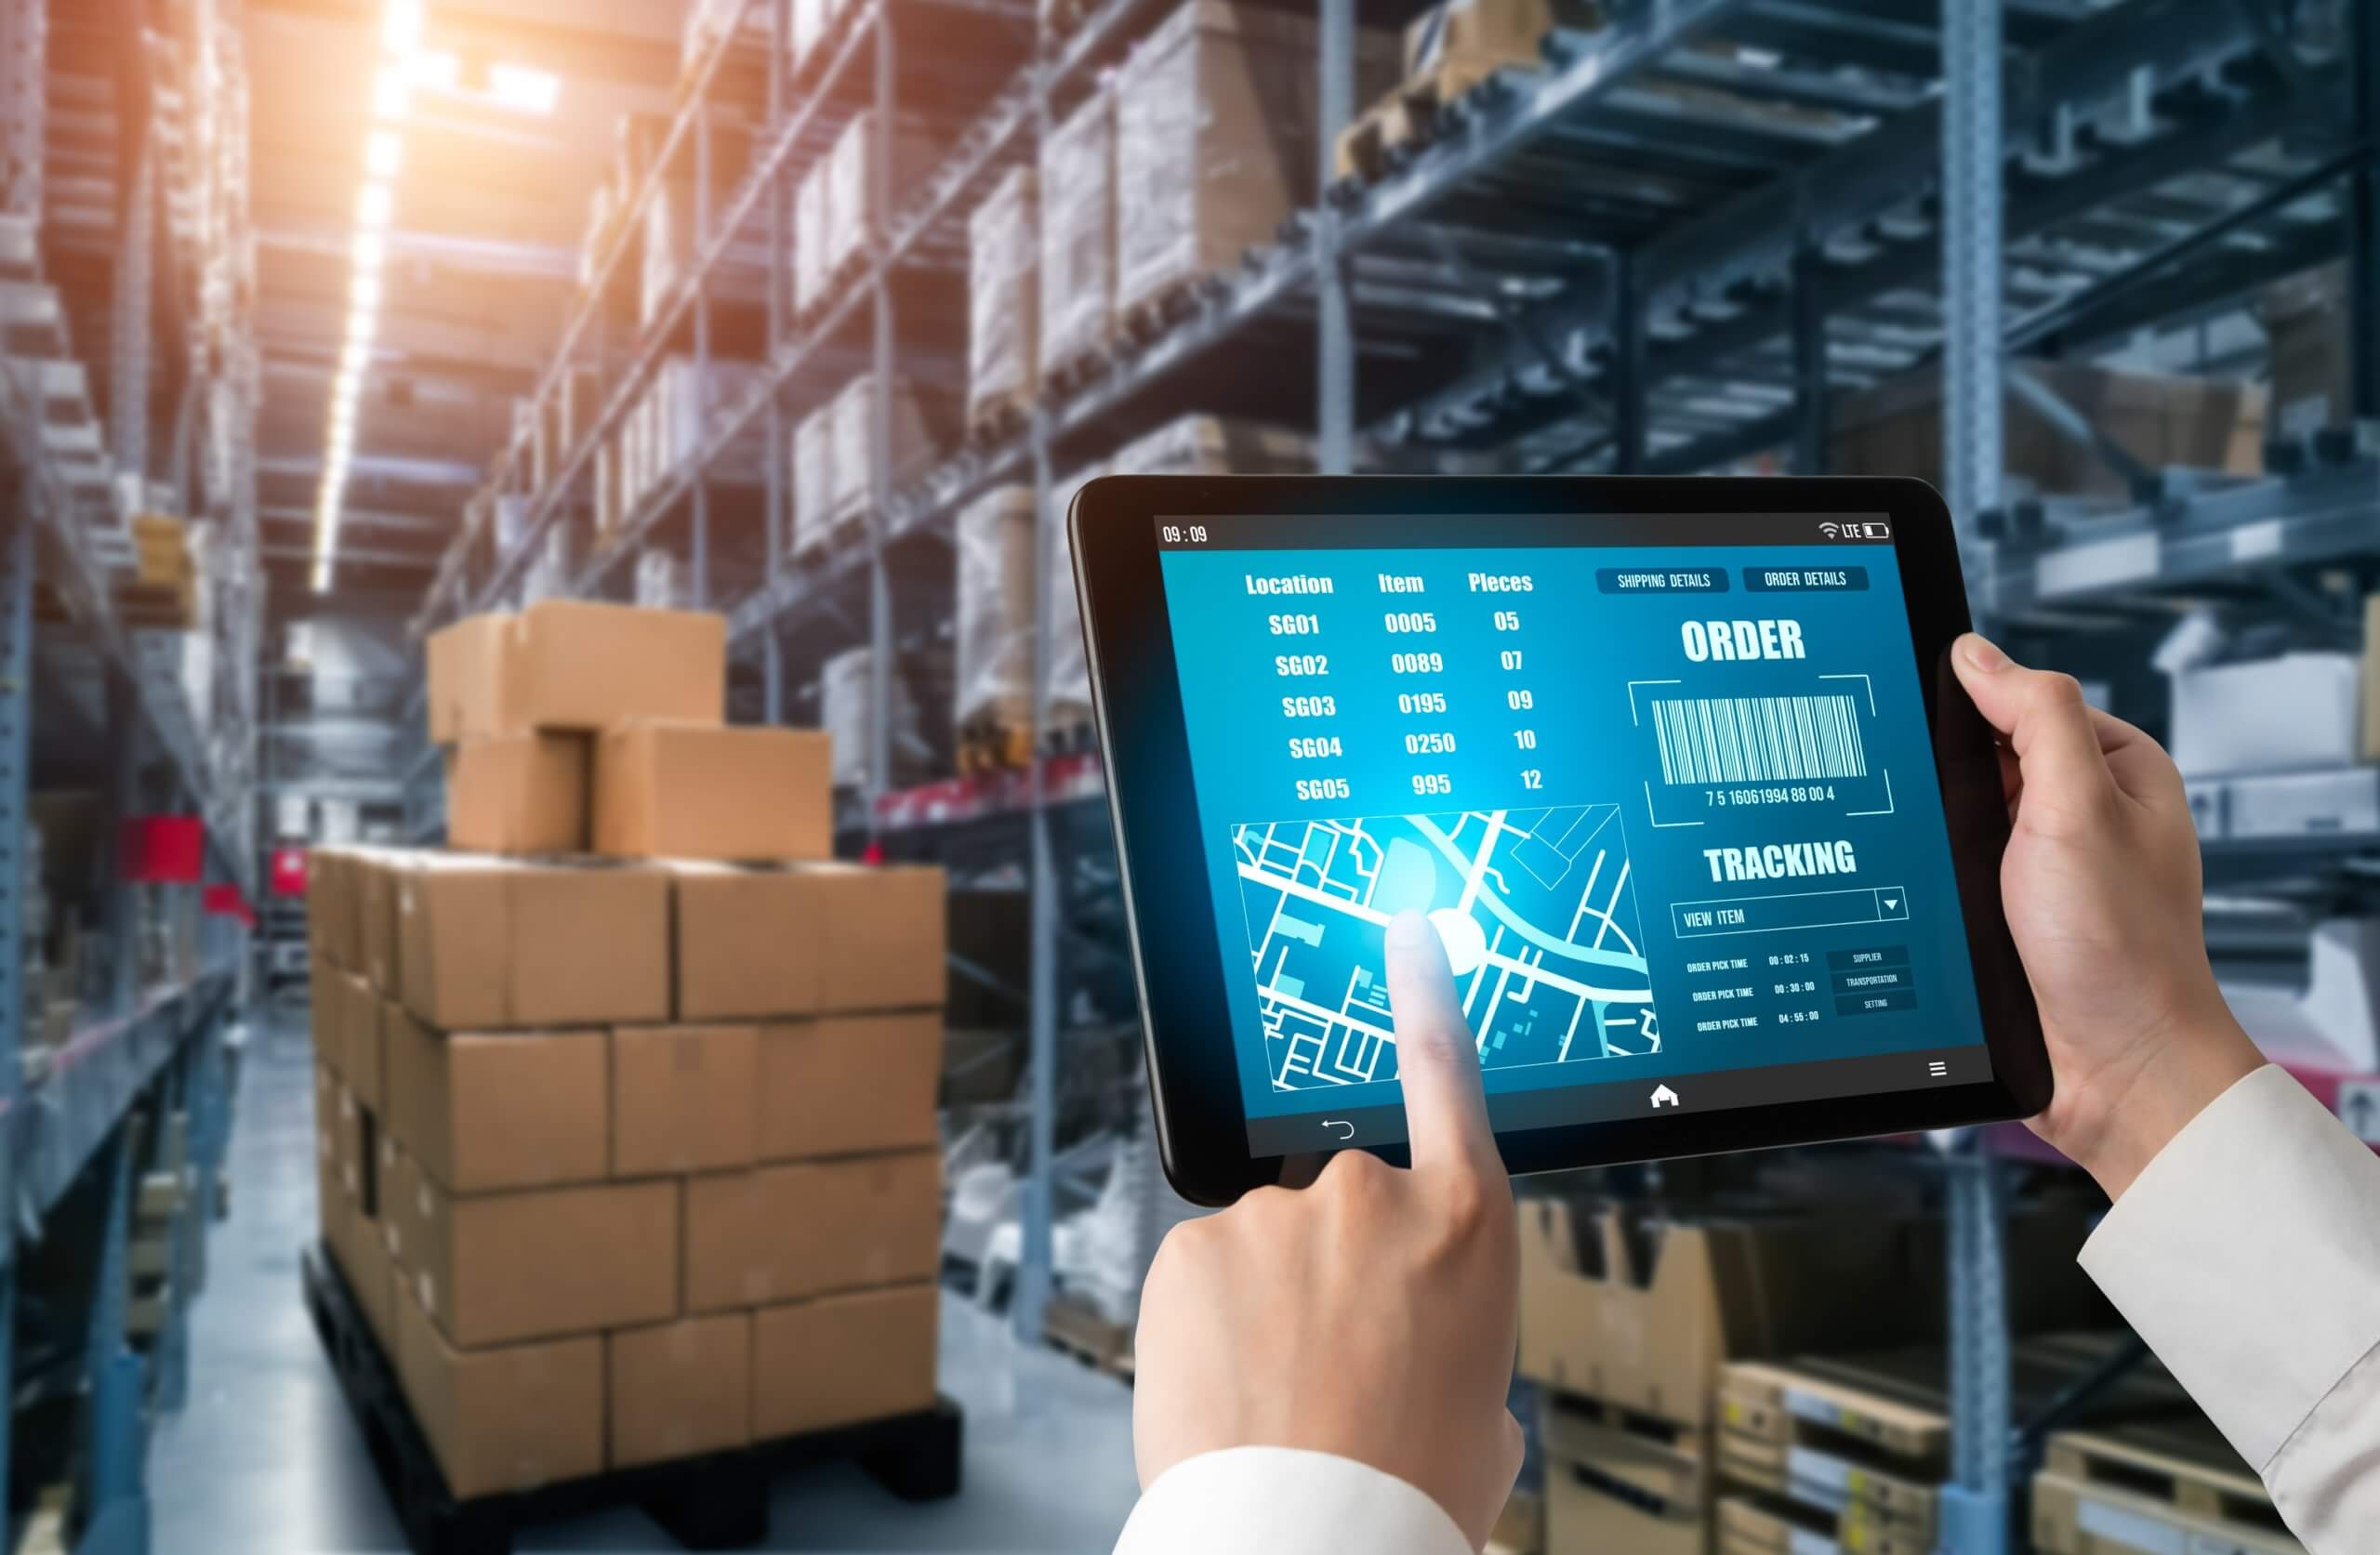 Scanning Inventory in Tablet, Warehouse Background